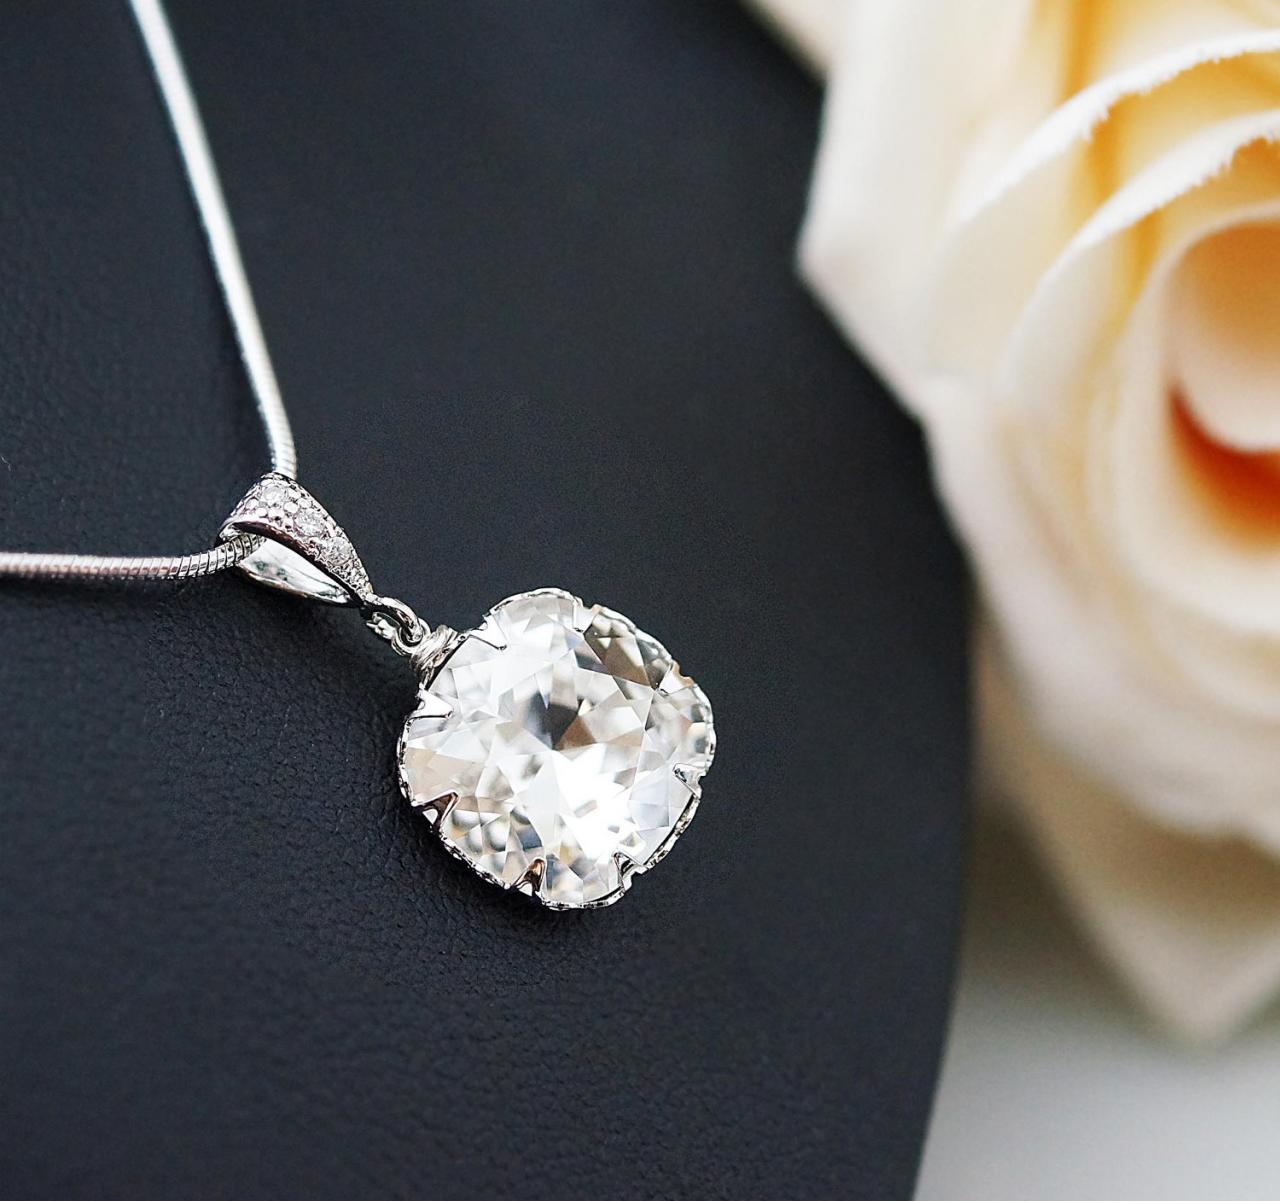 Wedding Jewelry Bridesmaid Jewelry Clear White Swarovski Crystal Square Drops Bridal Necklace Bridesmaid Necklace